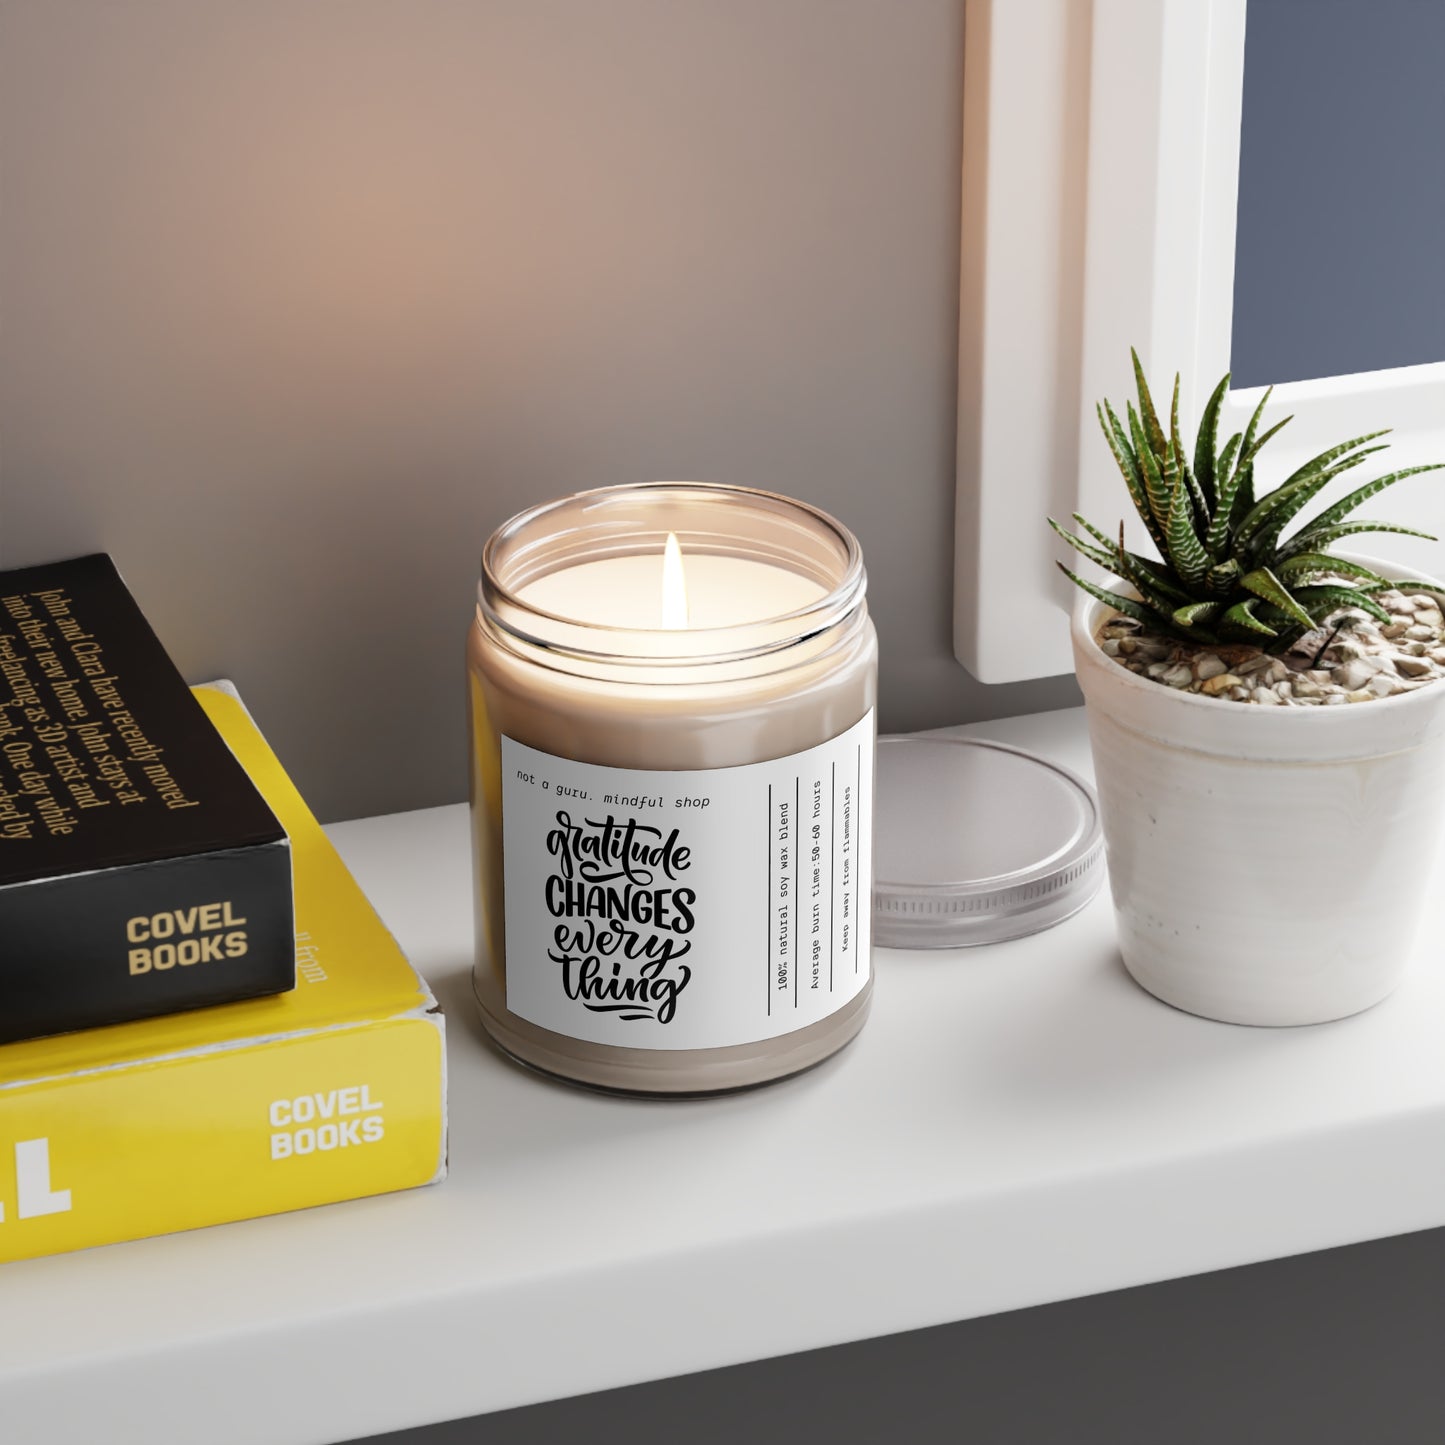 Gratitude Changes Everything Scented Candles